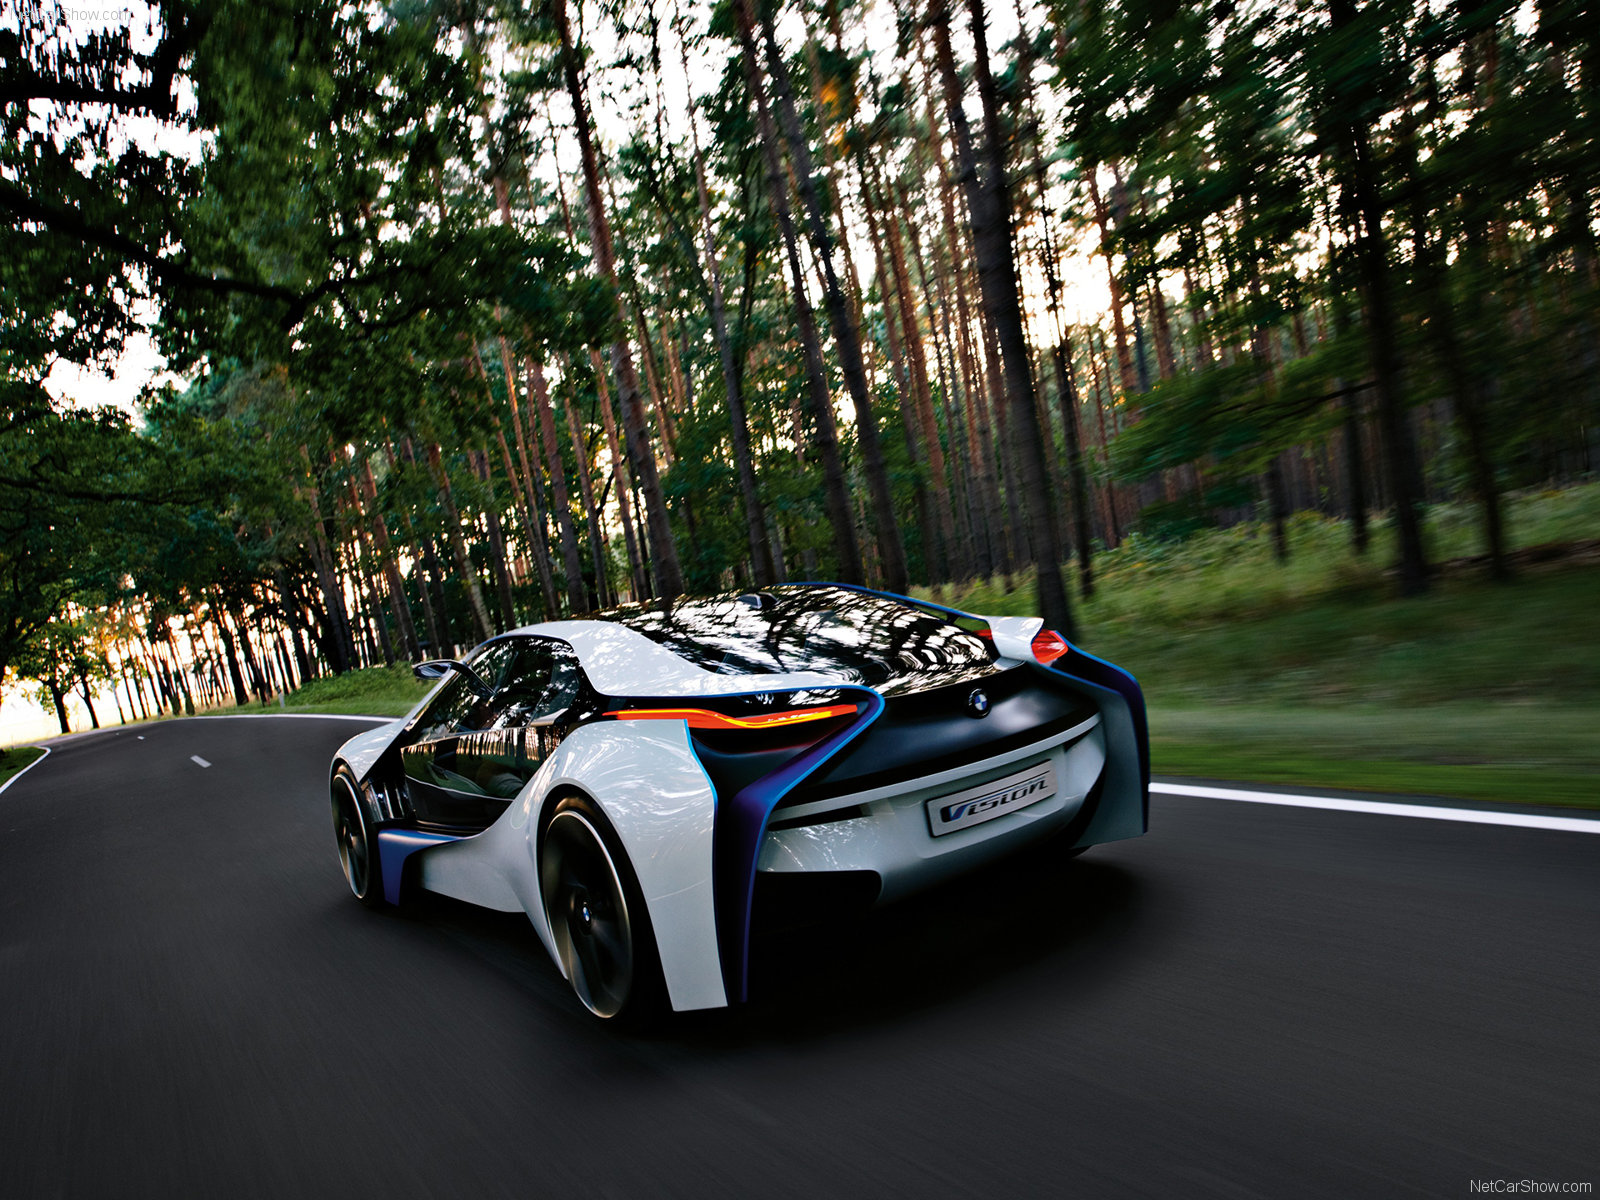 Bmw Vision Wallpapers